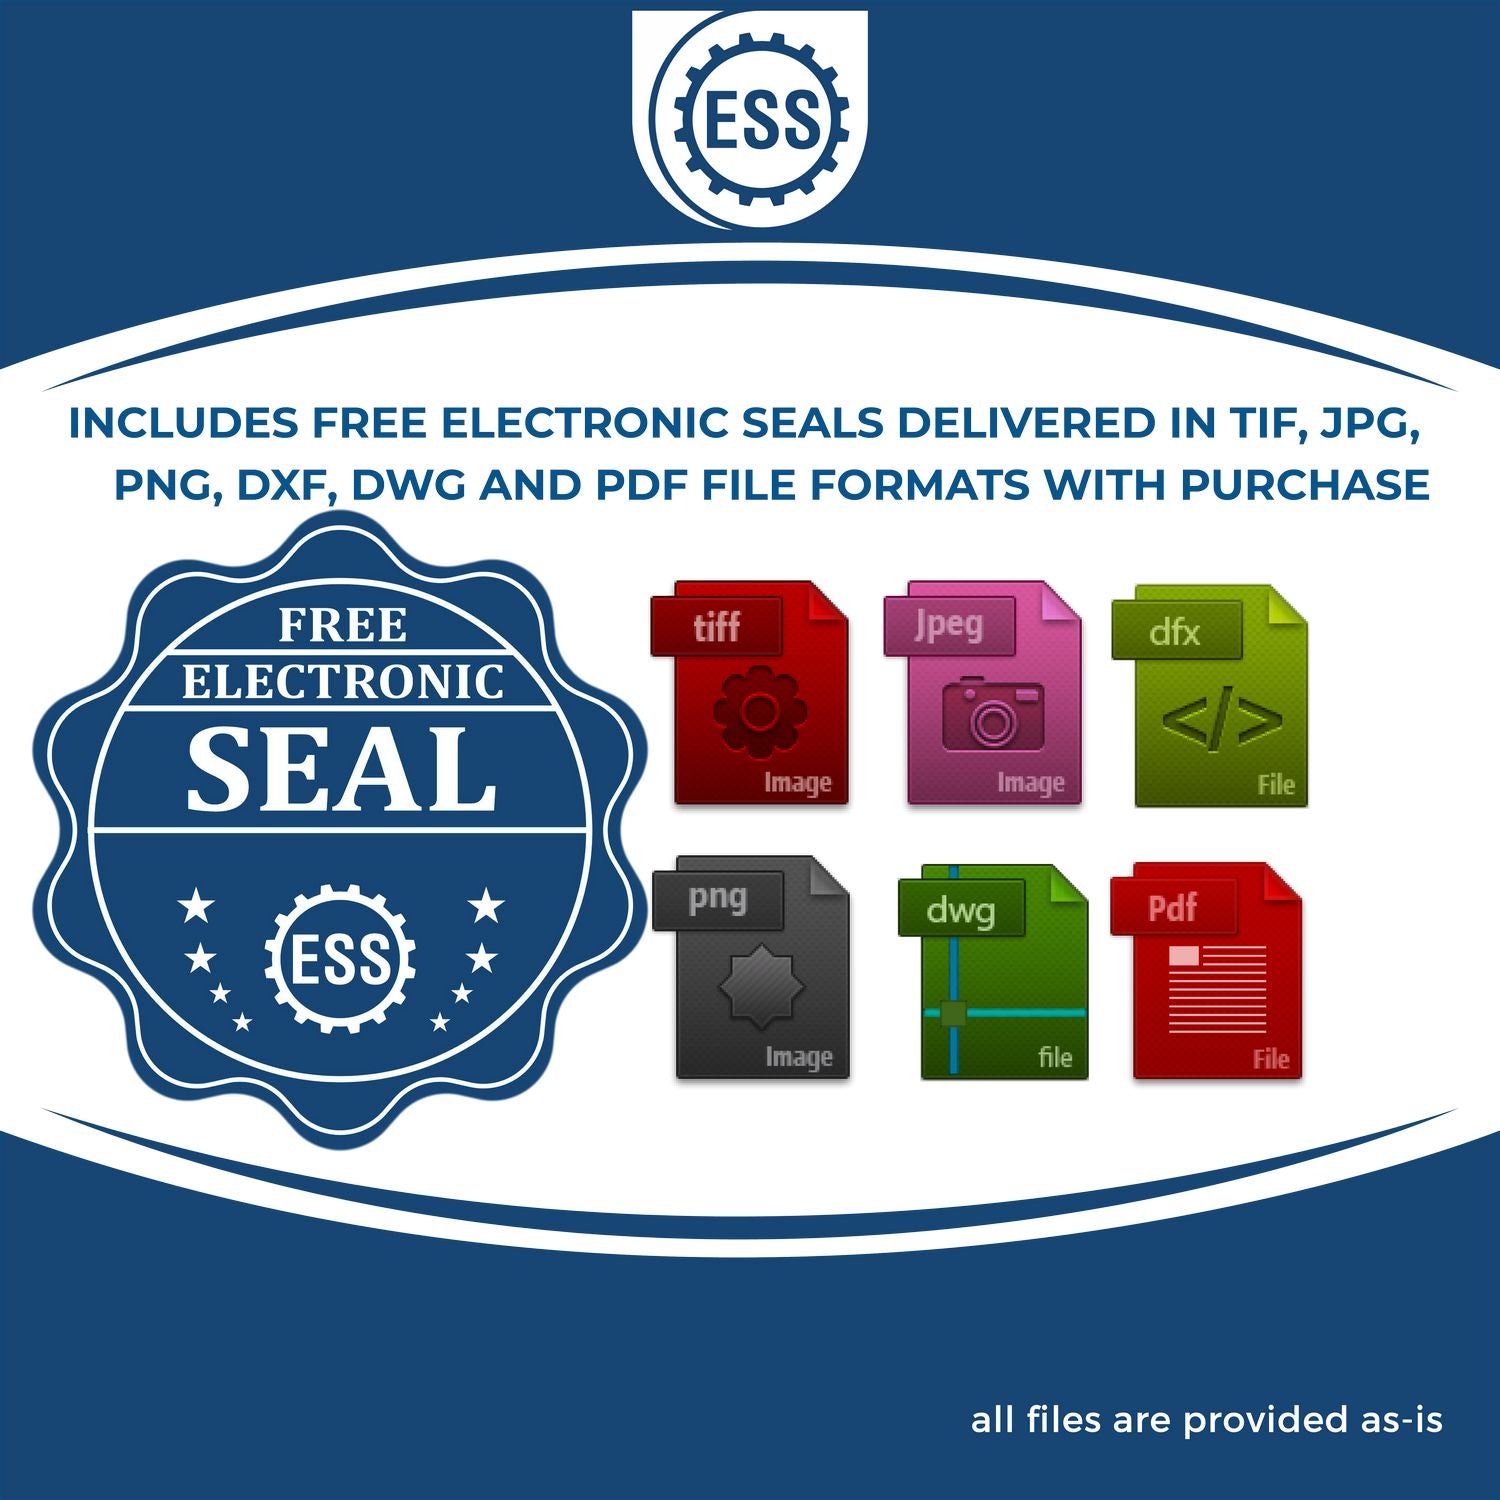 An infographic for the free electronic seal for the Colorado Engineer Desk Seal illustrating the different file type icons such as DXF, DWG, TIF, JPG and PNG.